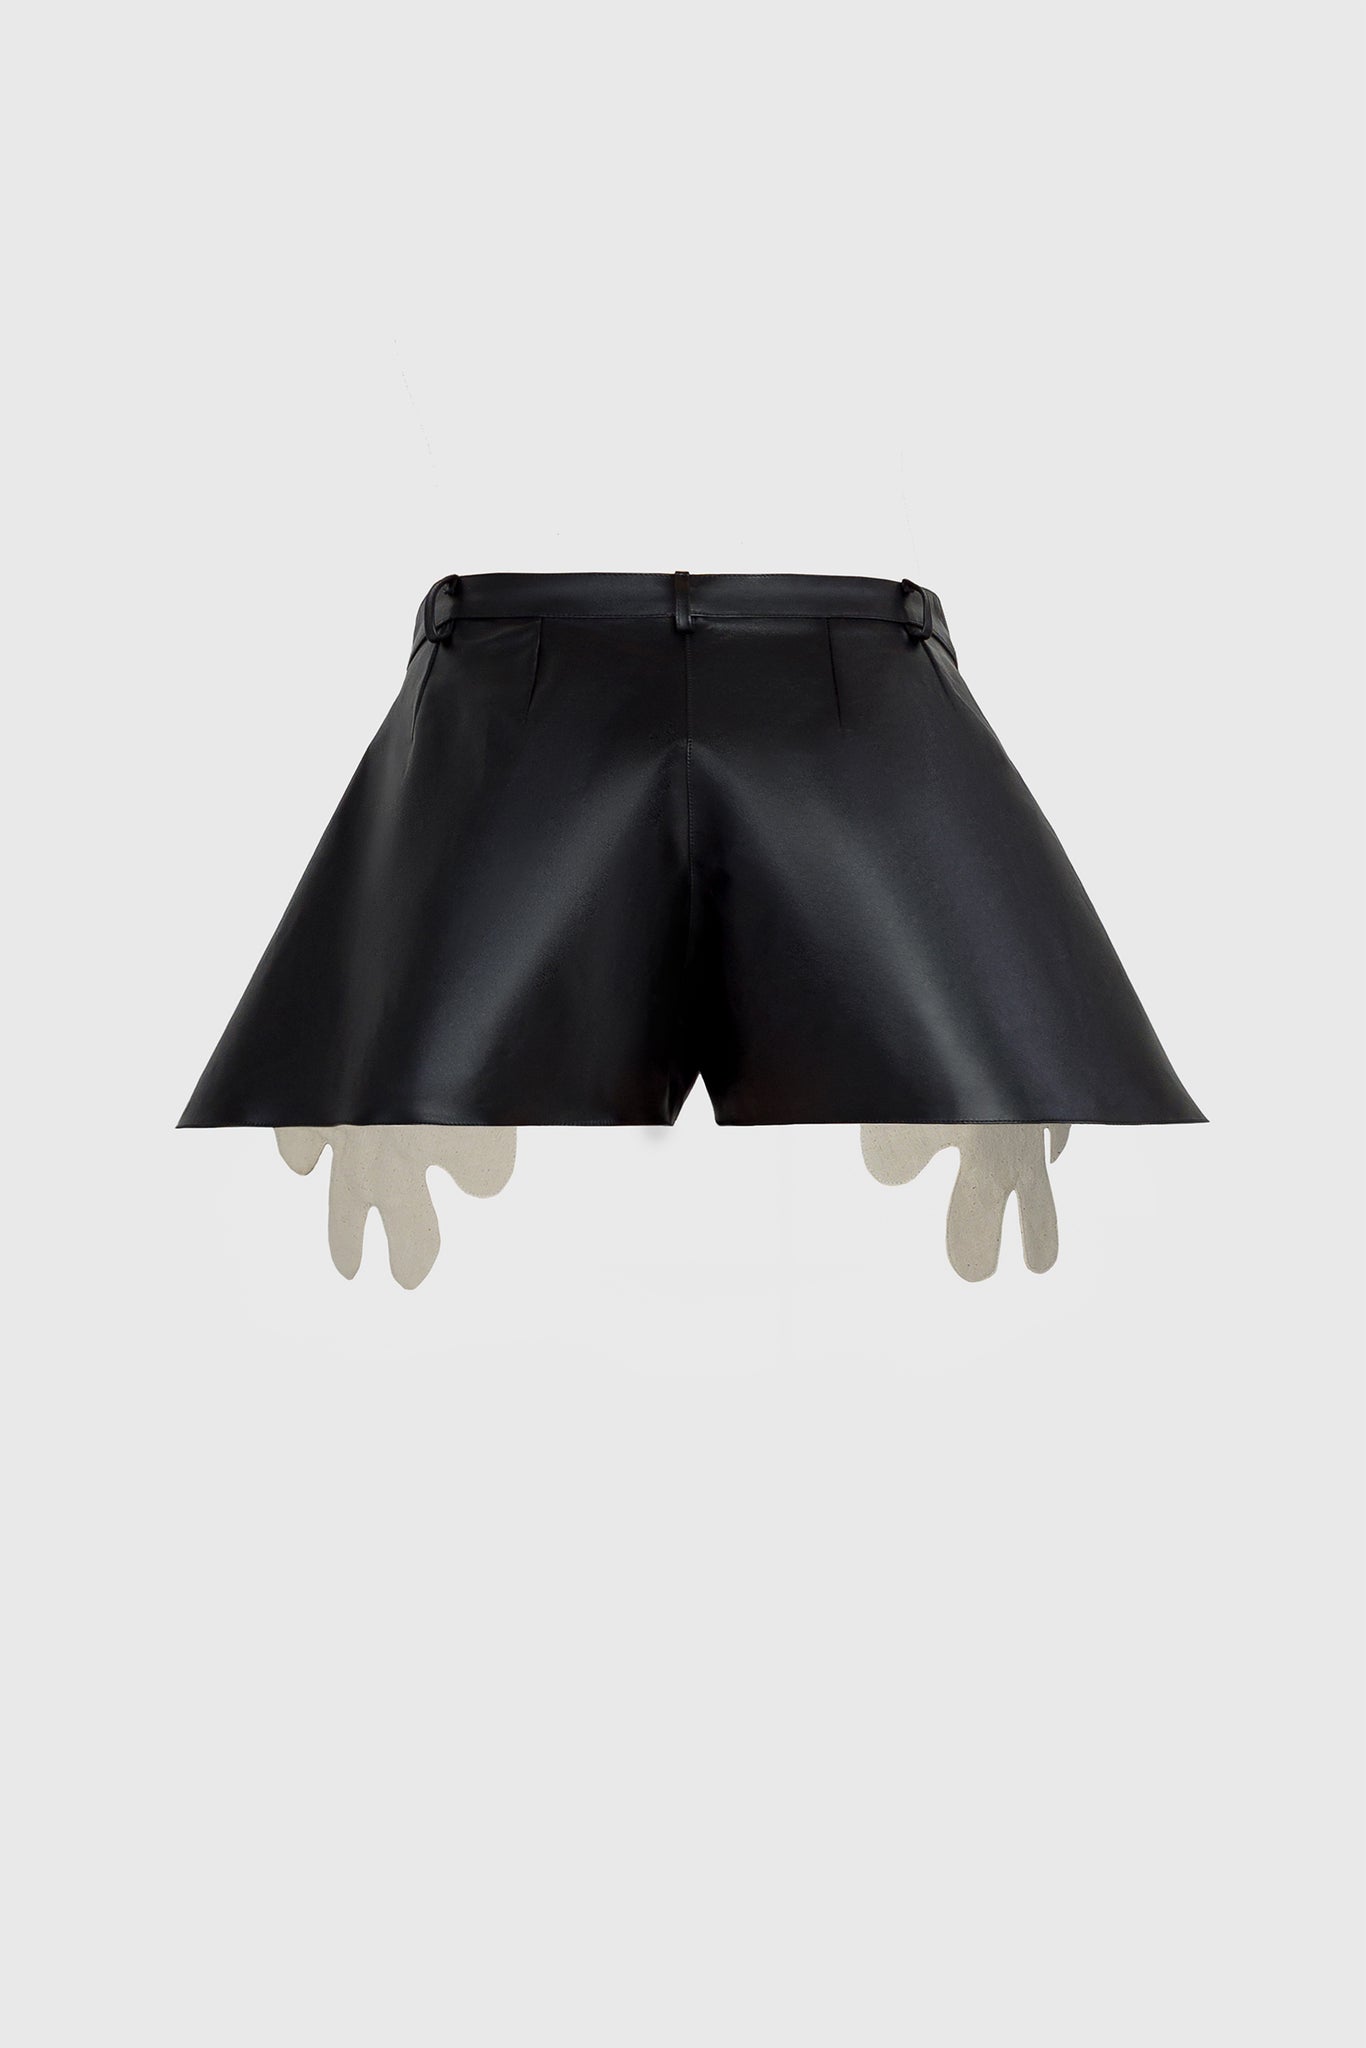 Ruxandra designed leather jogging style shorts, darts defined shape, exaggerated tapered silhouette, smooth corners, back length higher than front length 